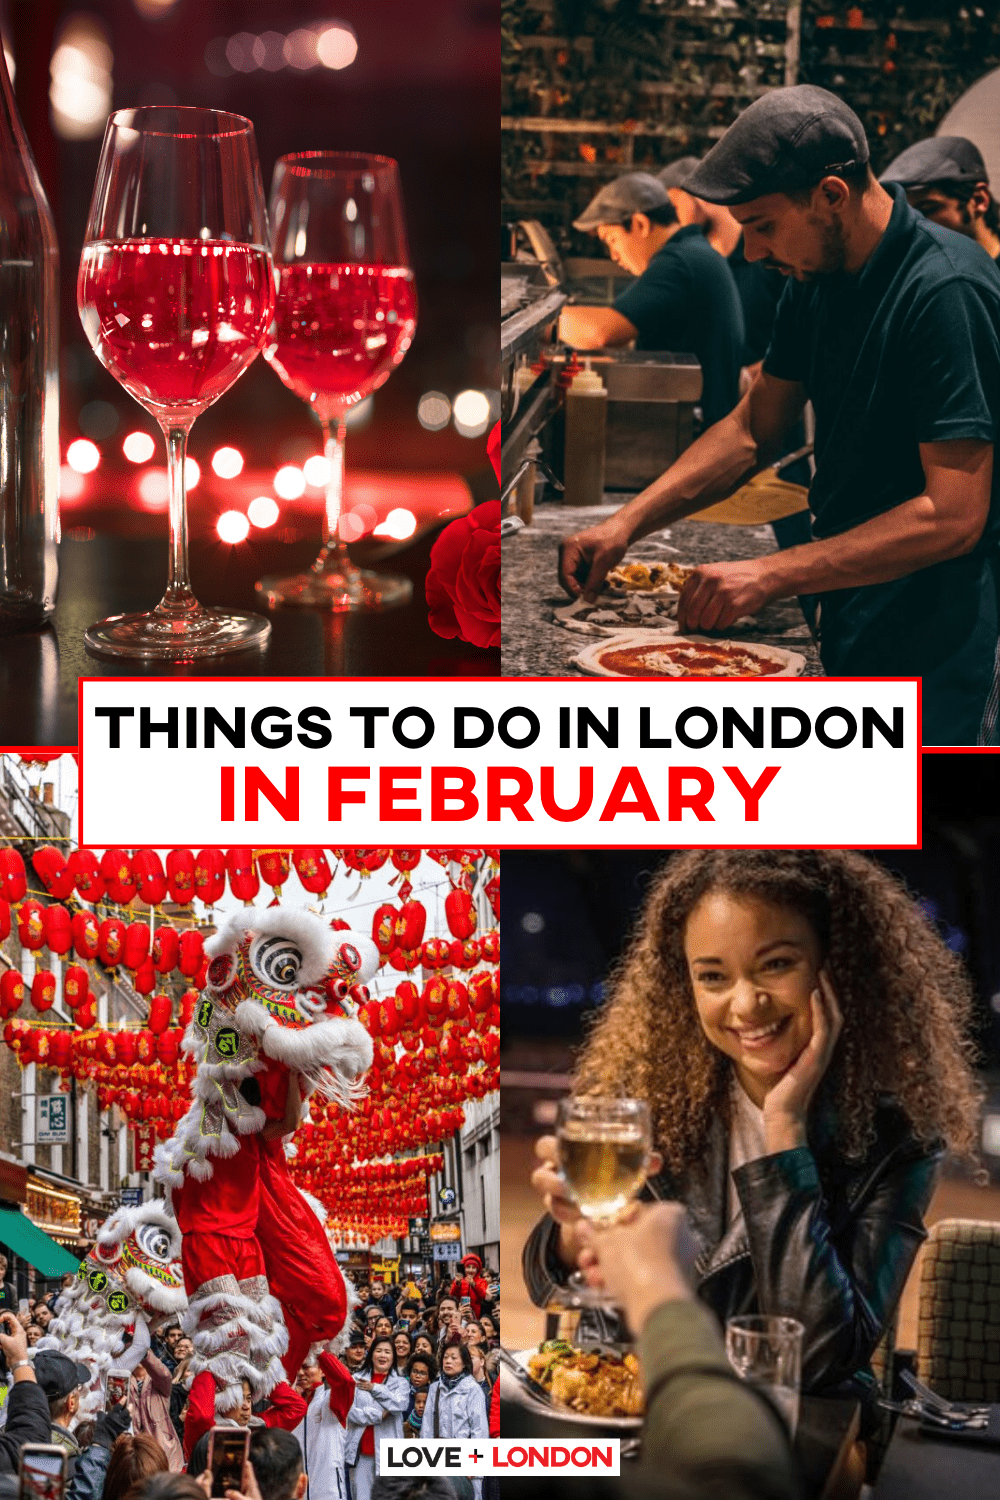 Things to Do in London in February